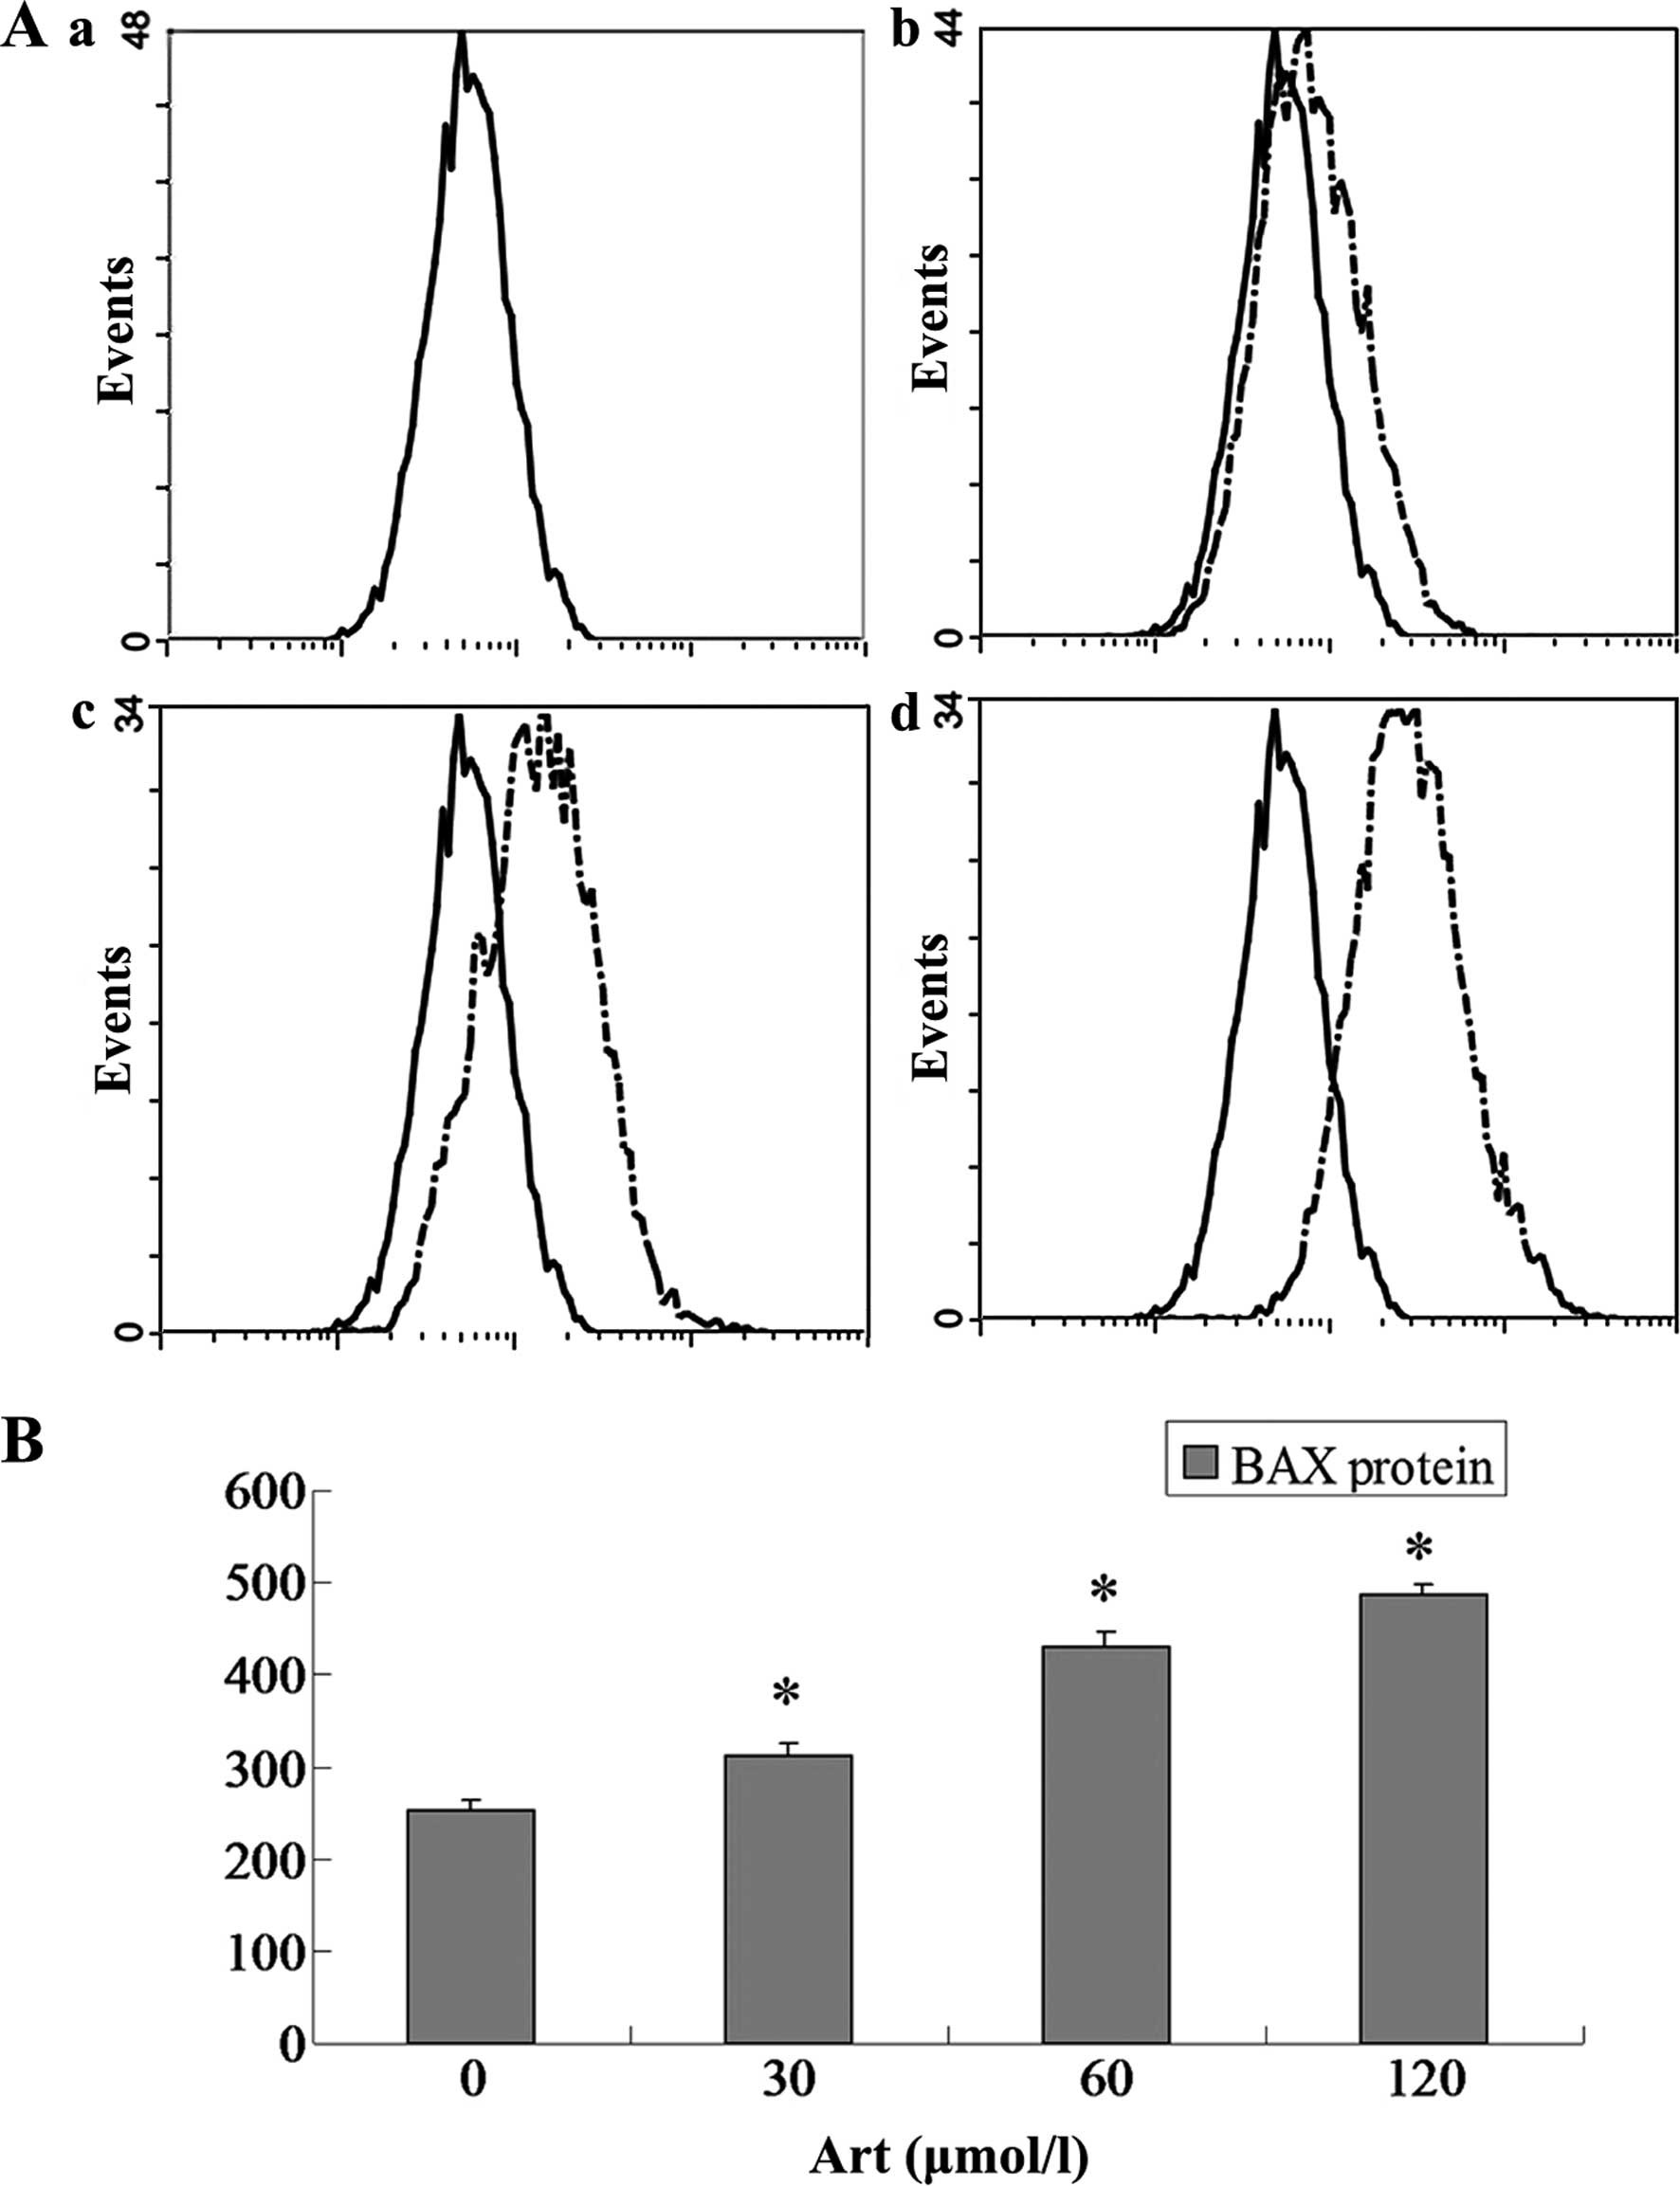 Artesunate induces apoptosis and inhibits growth of Eca109 